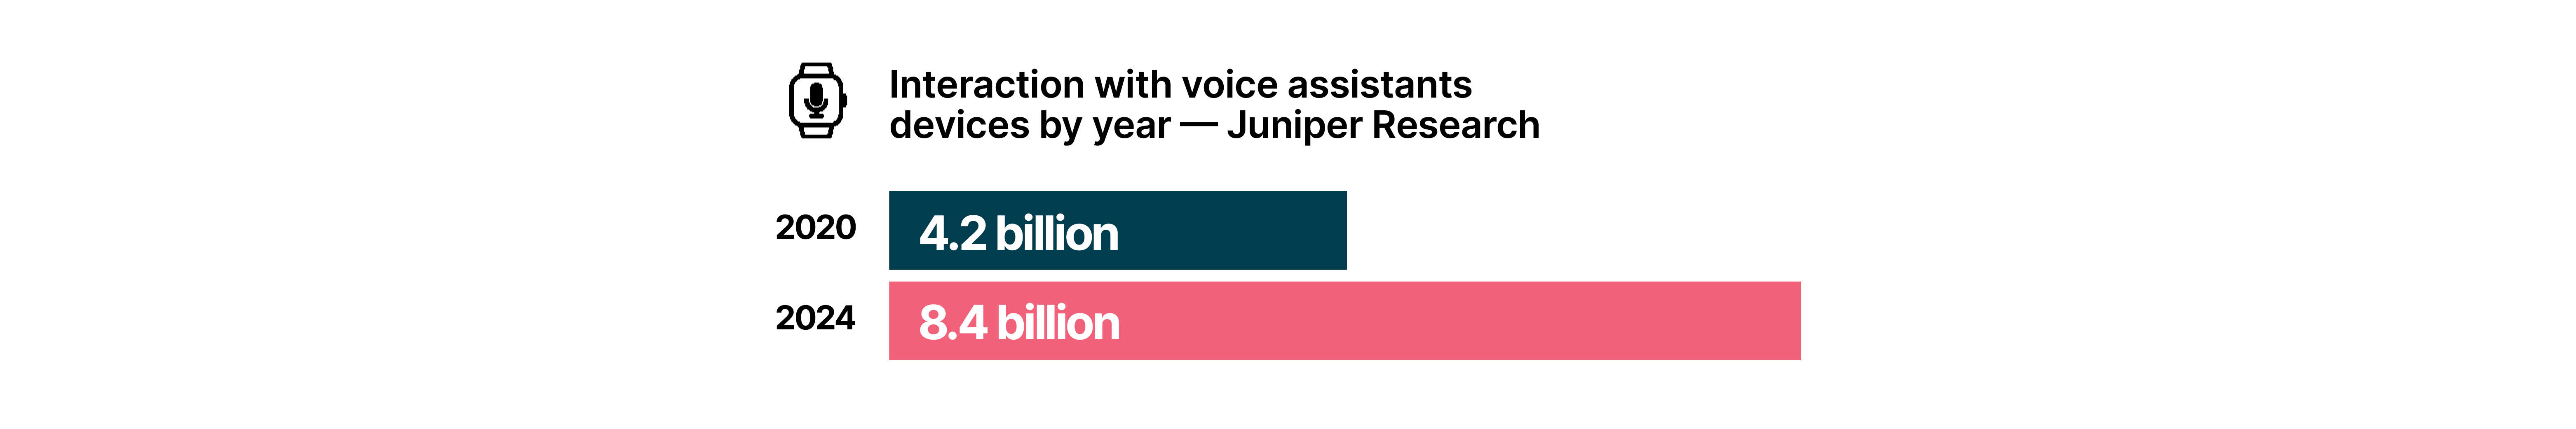 Interaction with voice assistants devices by year